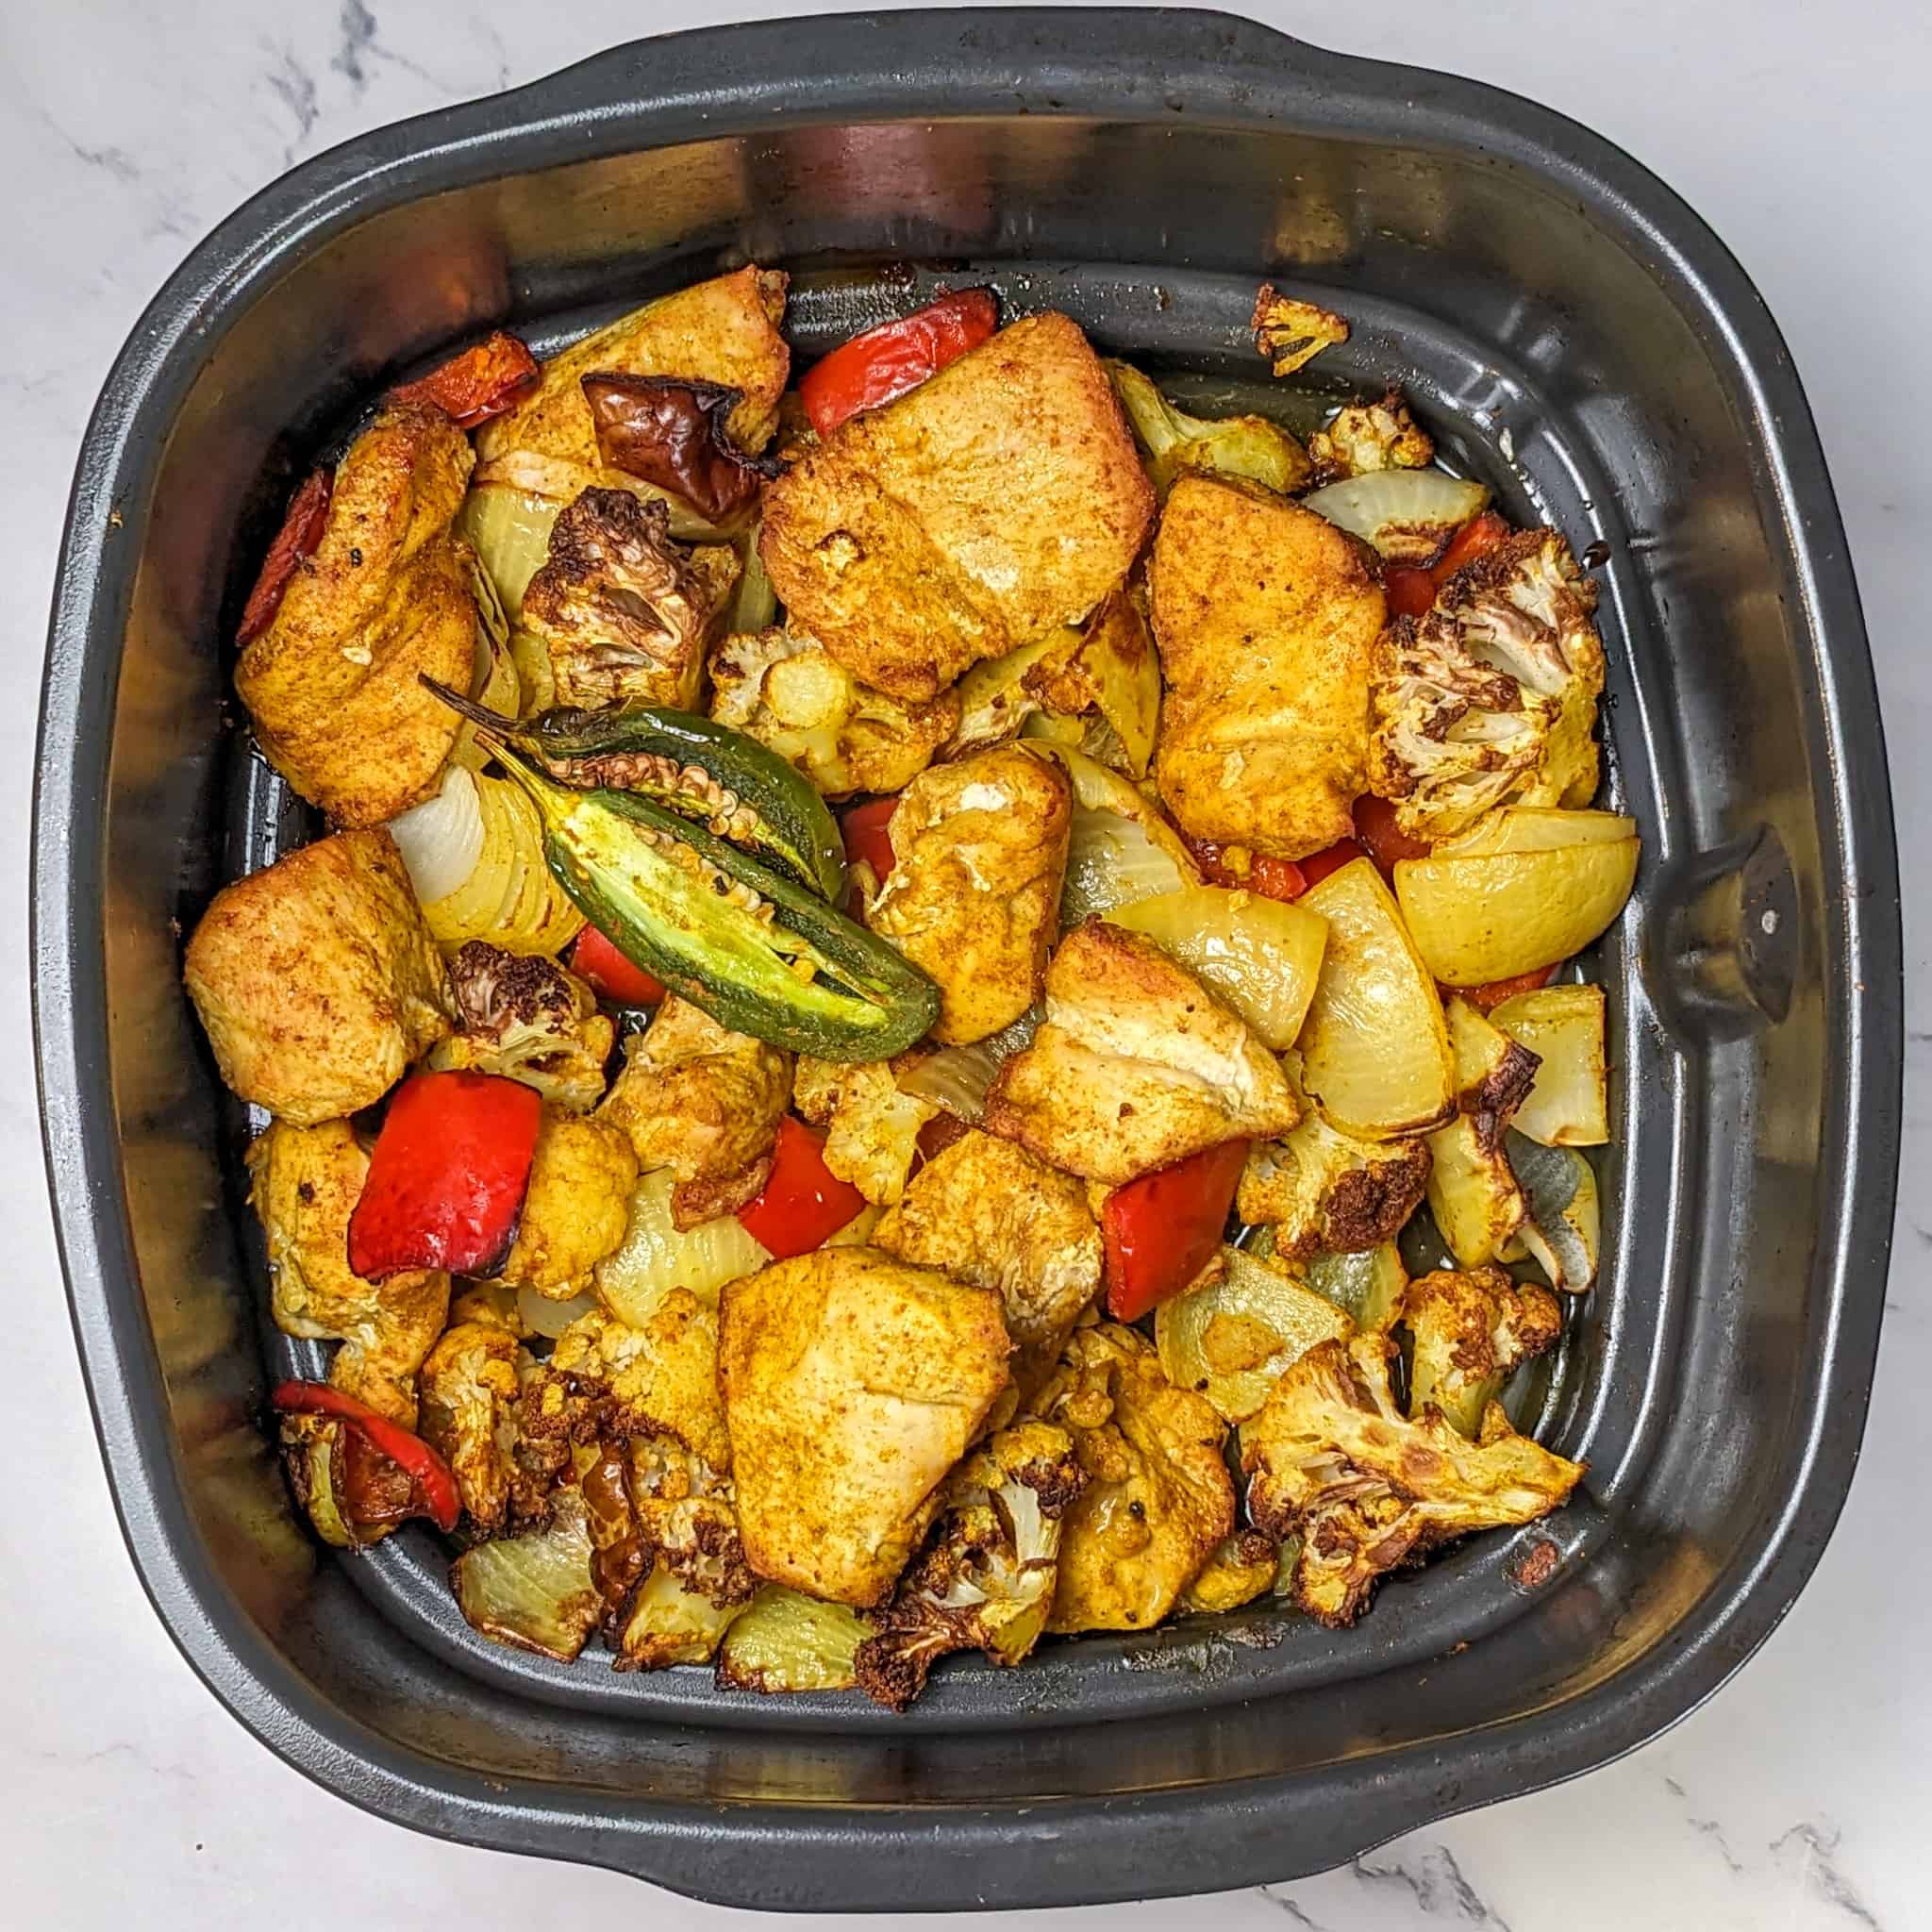 top view of the golden brown chicken and vegetables and jalapeno pepper for the Air Fryer Roasted Chicken Chickpeas Vegetable Curry recipe in the Ninja Foodi 5-in-1 Indoor Electric Grill roasting pan.